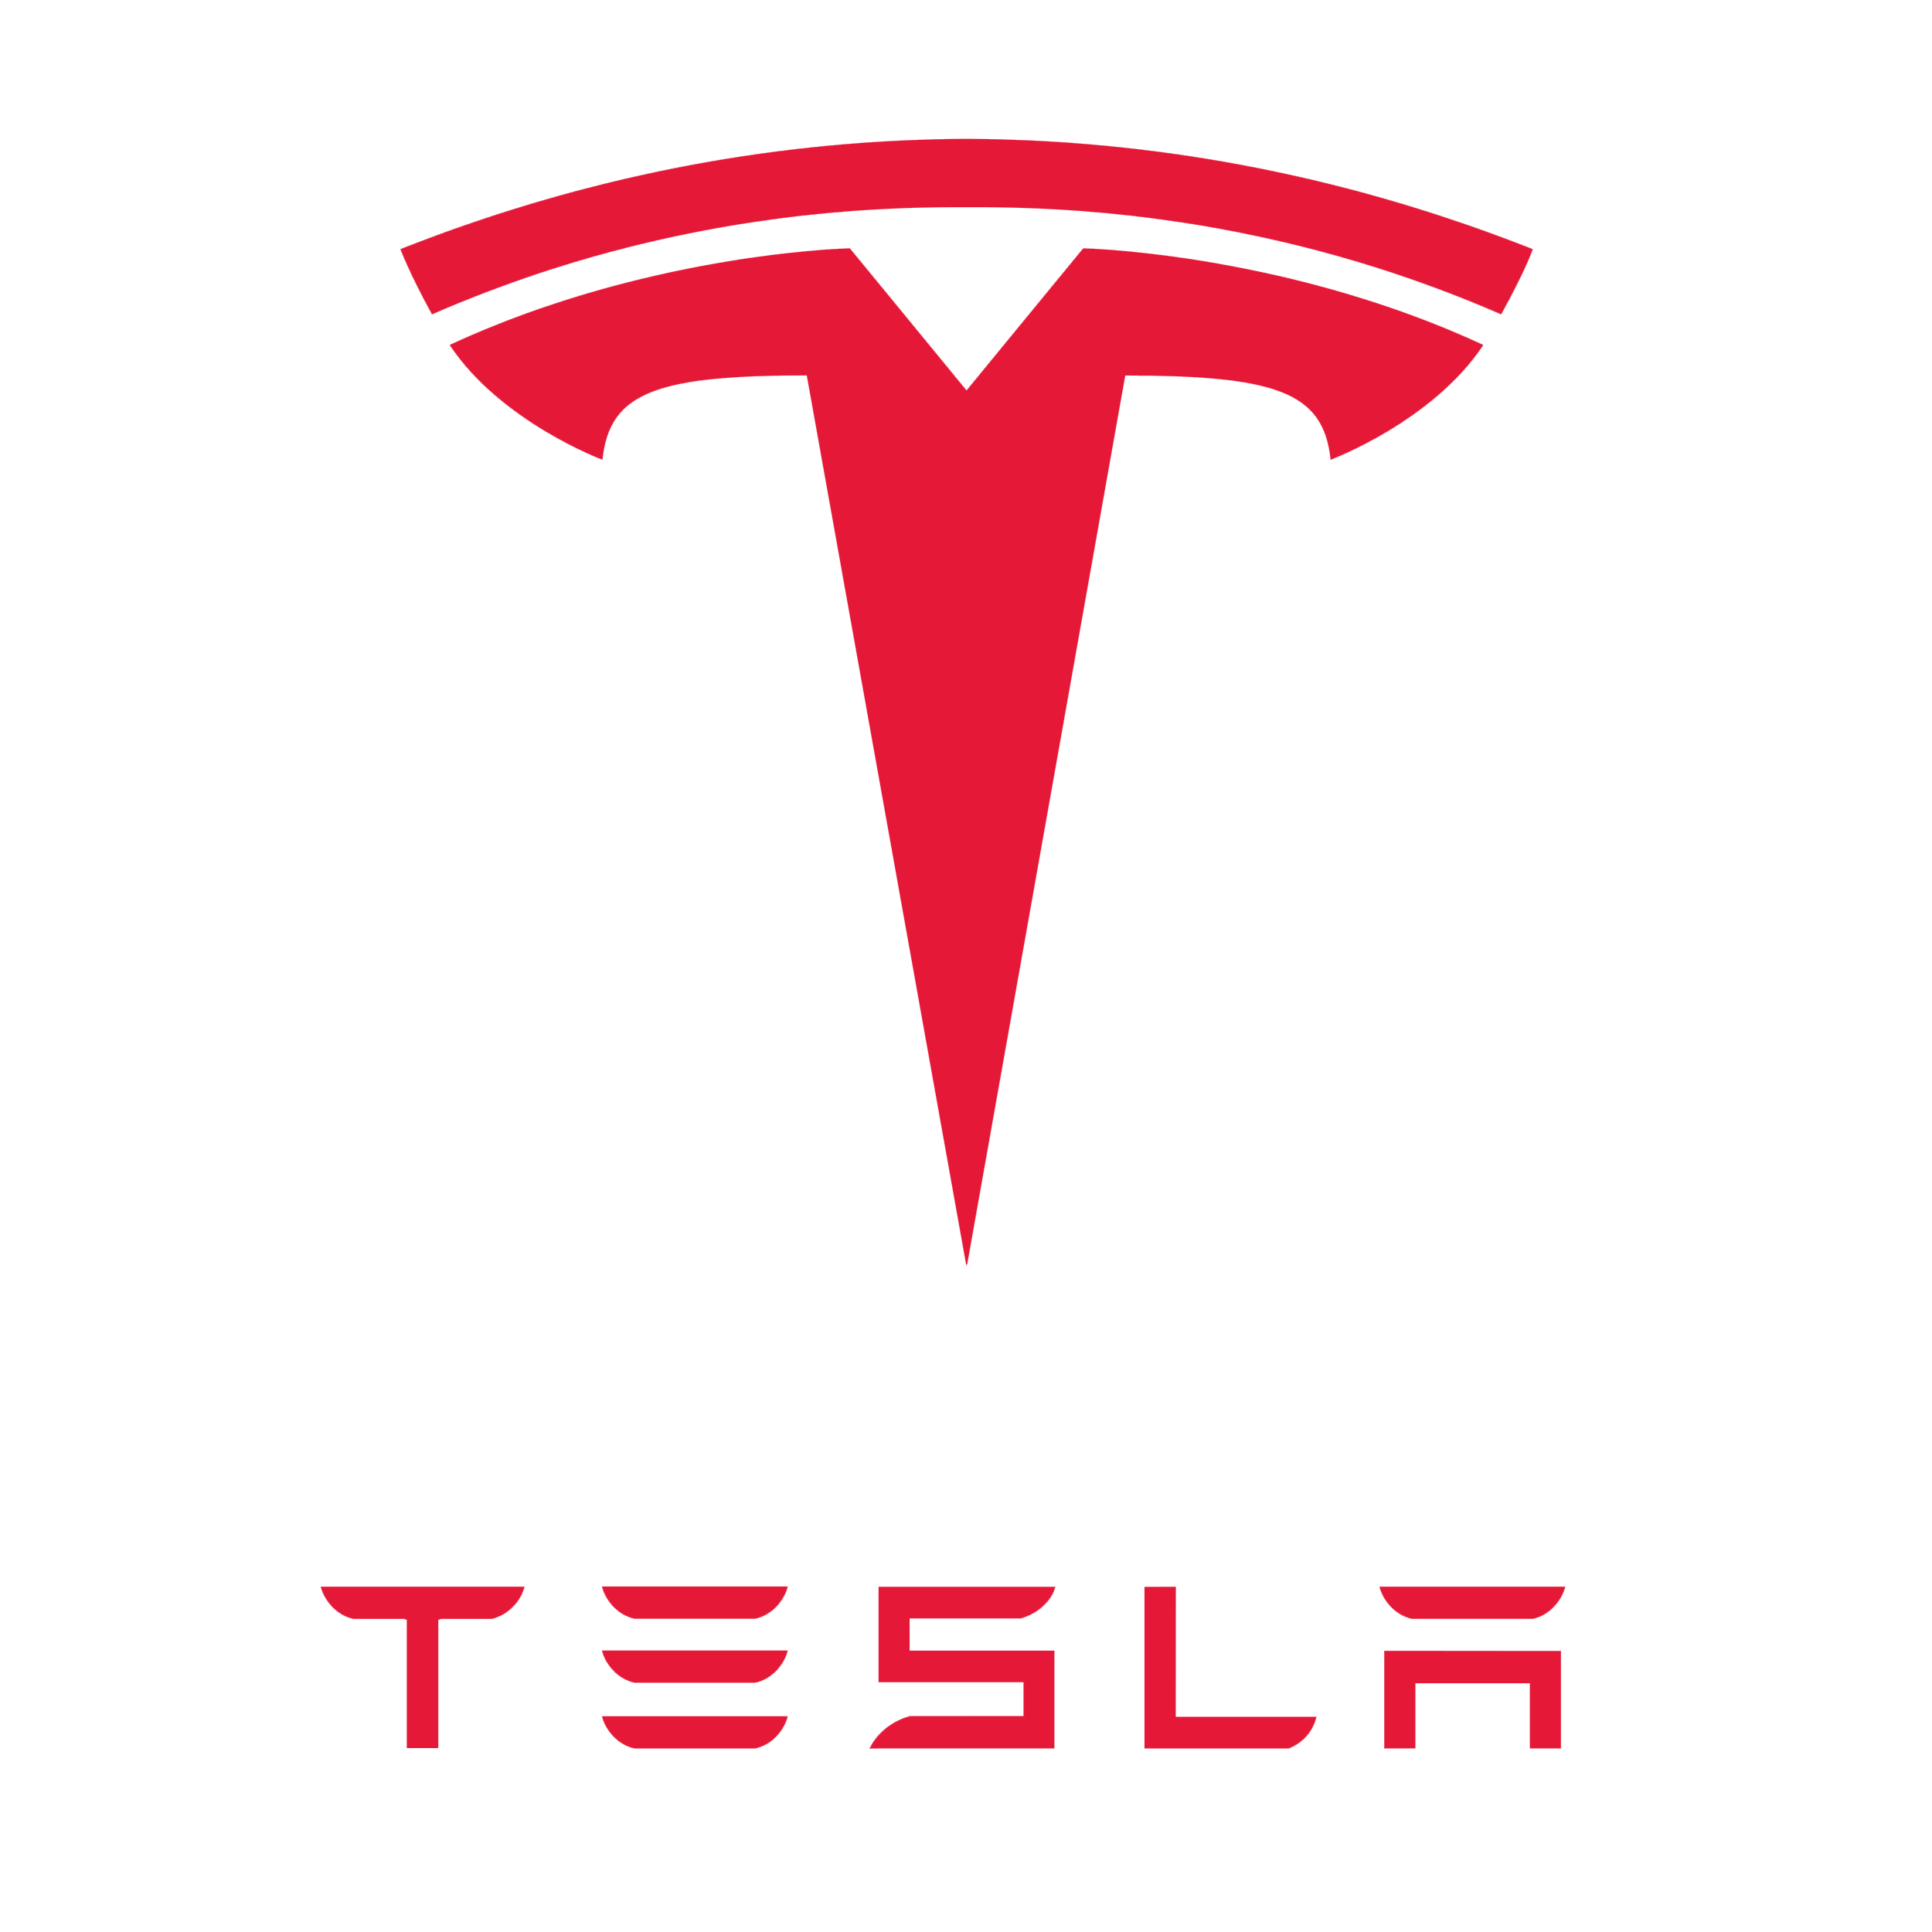 Read more about: Tesla